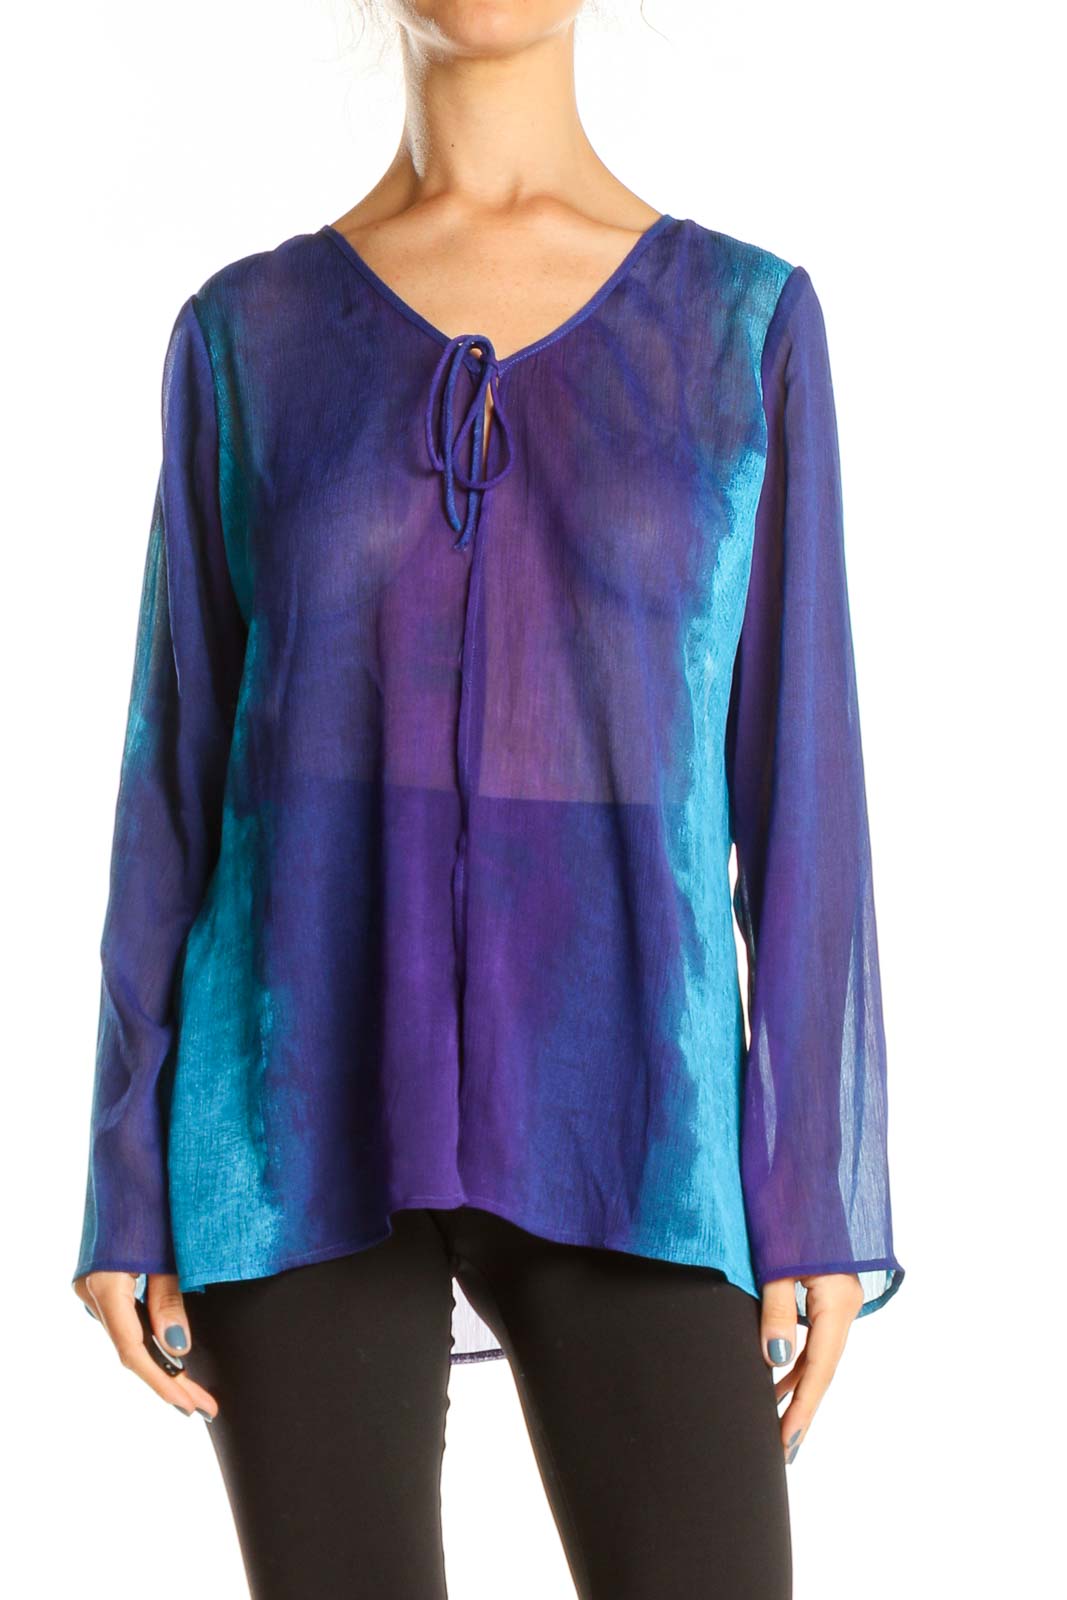 Blue Purple Sheer Retro Party Top Front